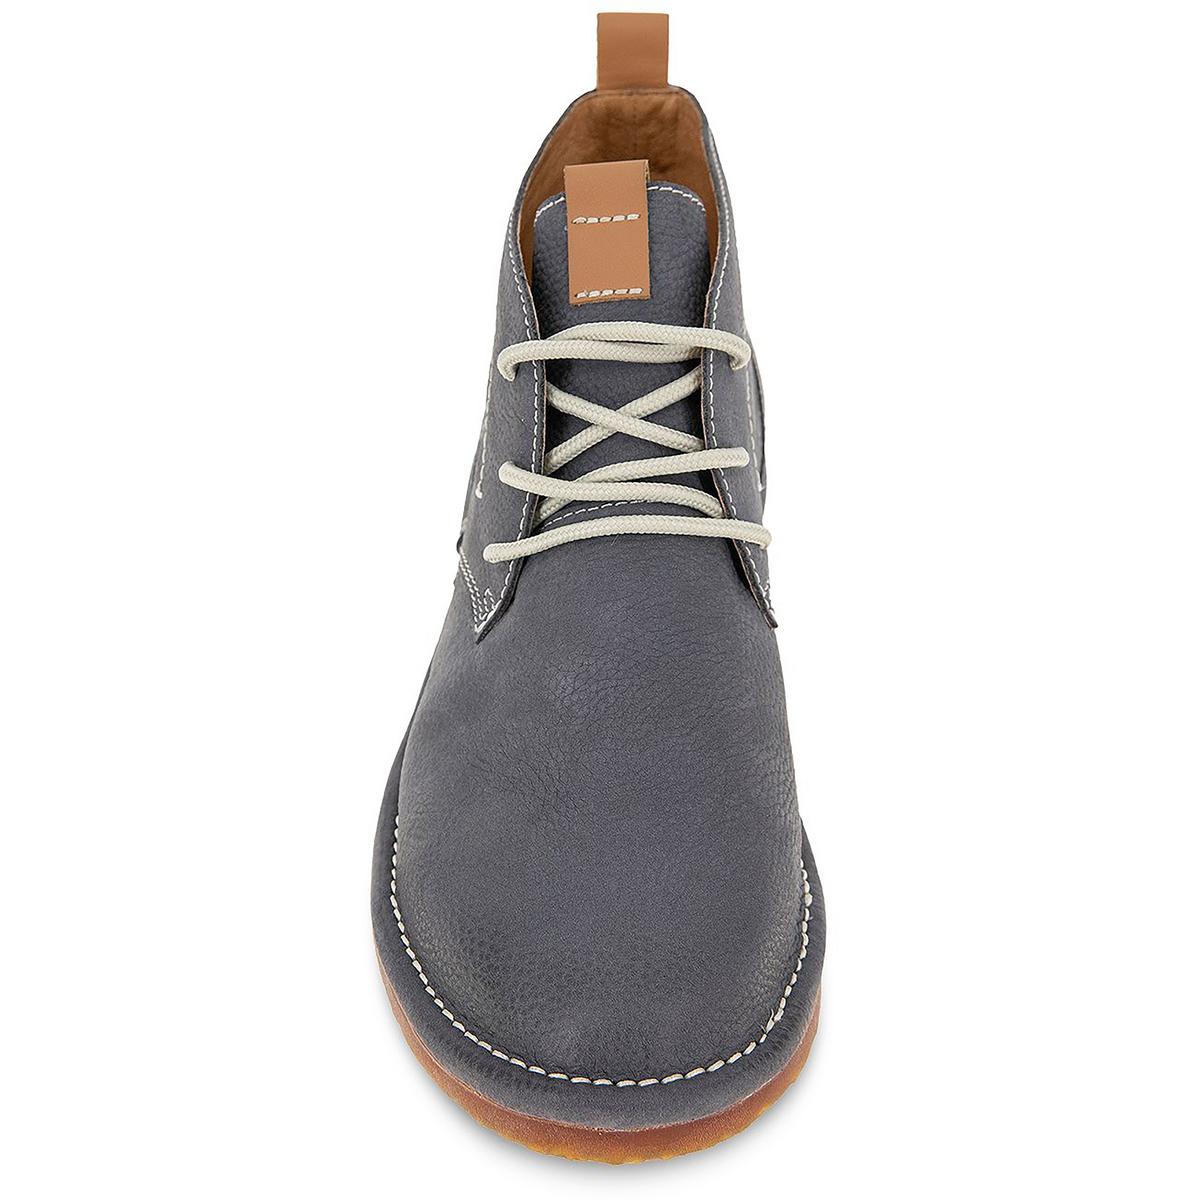 Kenneth Cole Albert Mens Leather Lace-Up Chukka Boots